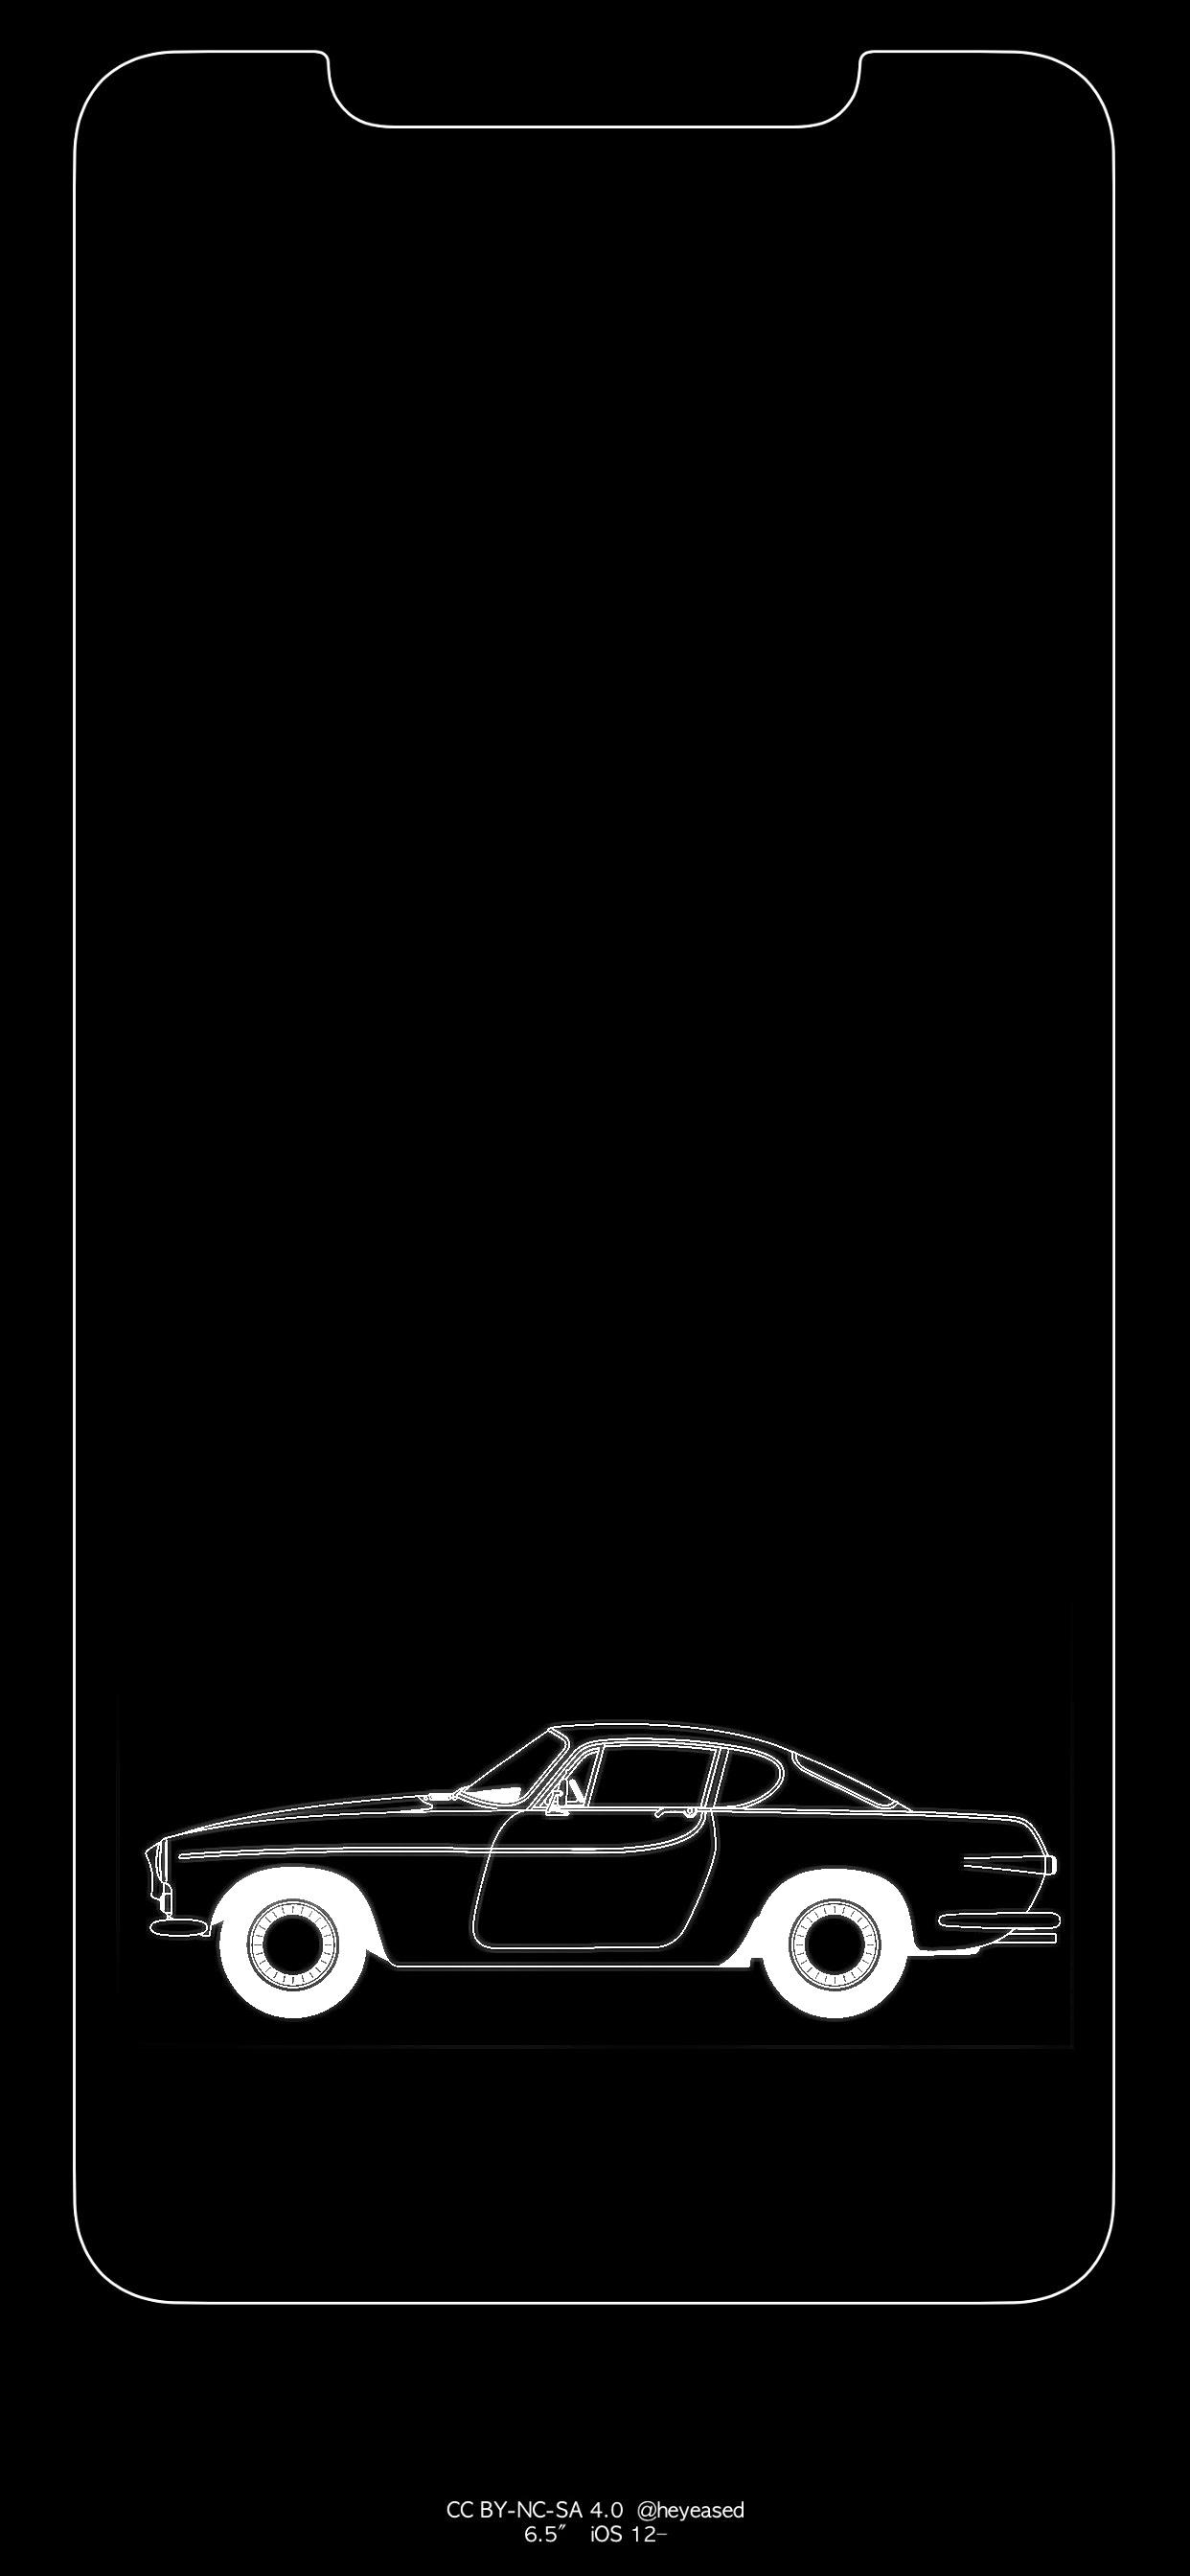 Wallpaper For IPhone XS Max 11 Pro, Found A Png Online And Created The Outline And Put It Into This Really Clean Border. If You Apply It Correctly The Car Will Sit Perfectly